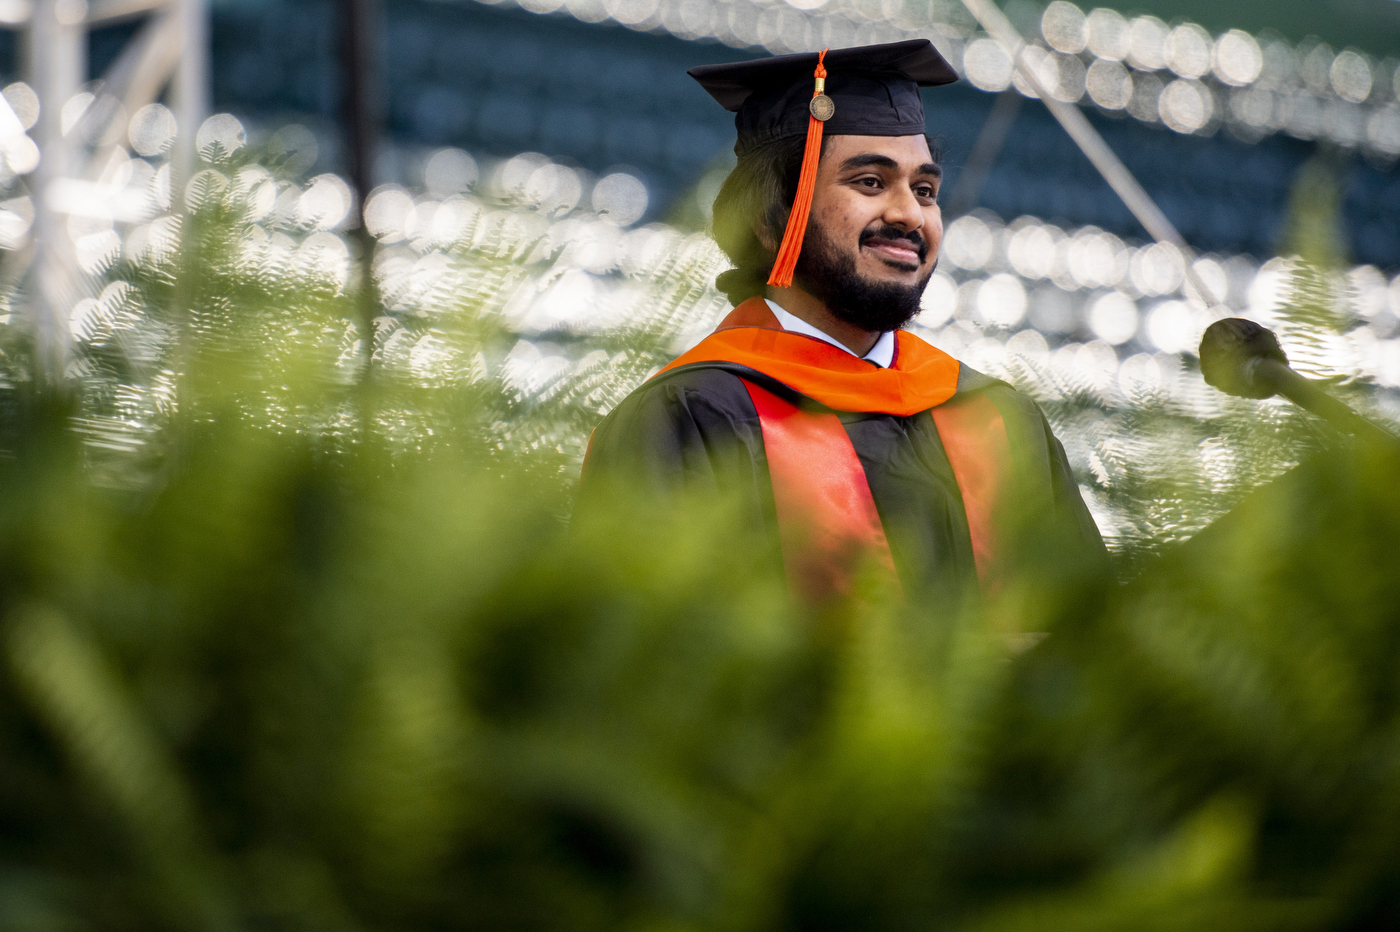 Gagan Dep Prabhu, who received a master’s degree in engineering, spoke about resilience at the Sunday morning graduate Commencement ceremony, urging graduates to cultivate their own sense of home no matter where their future takes them.